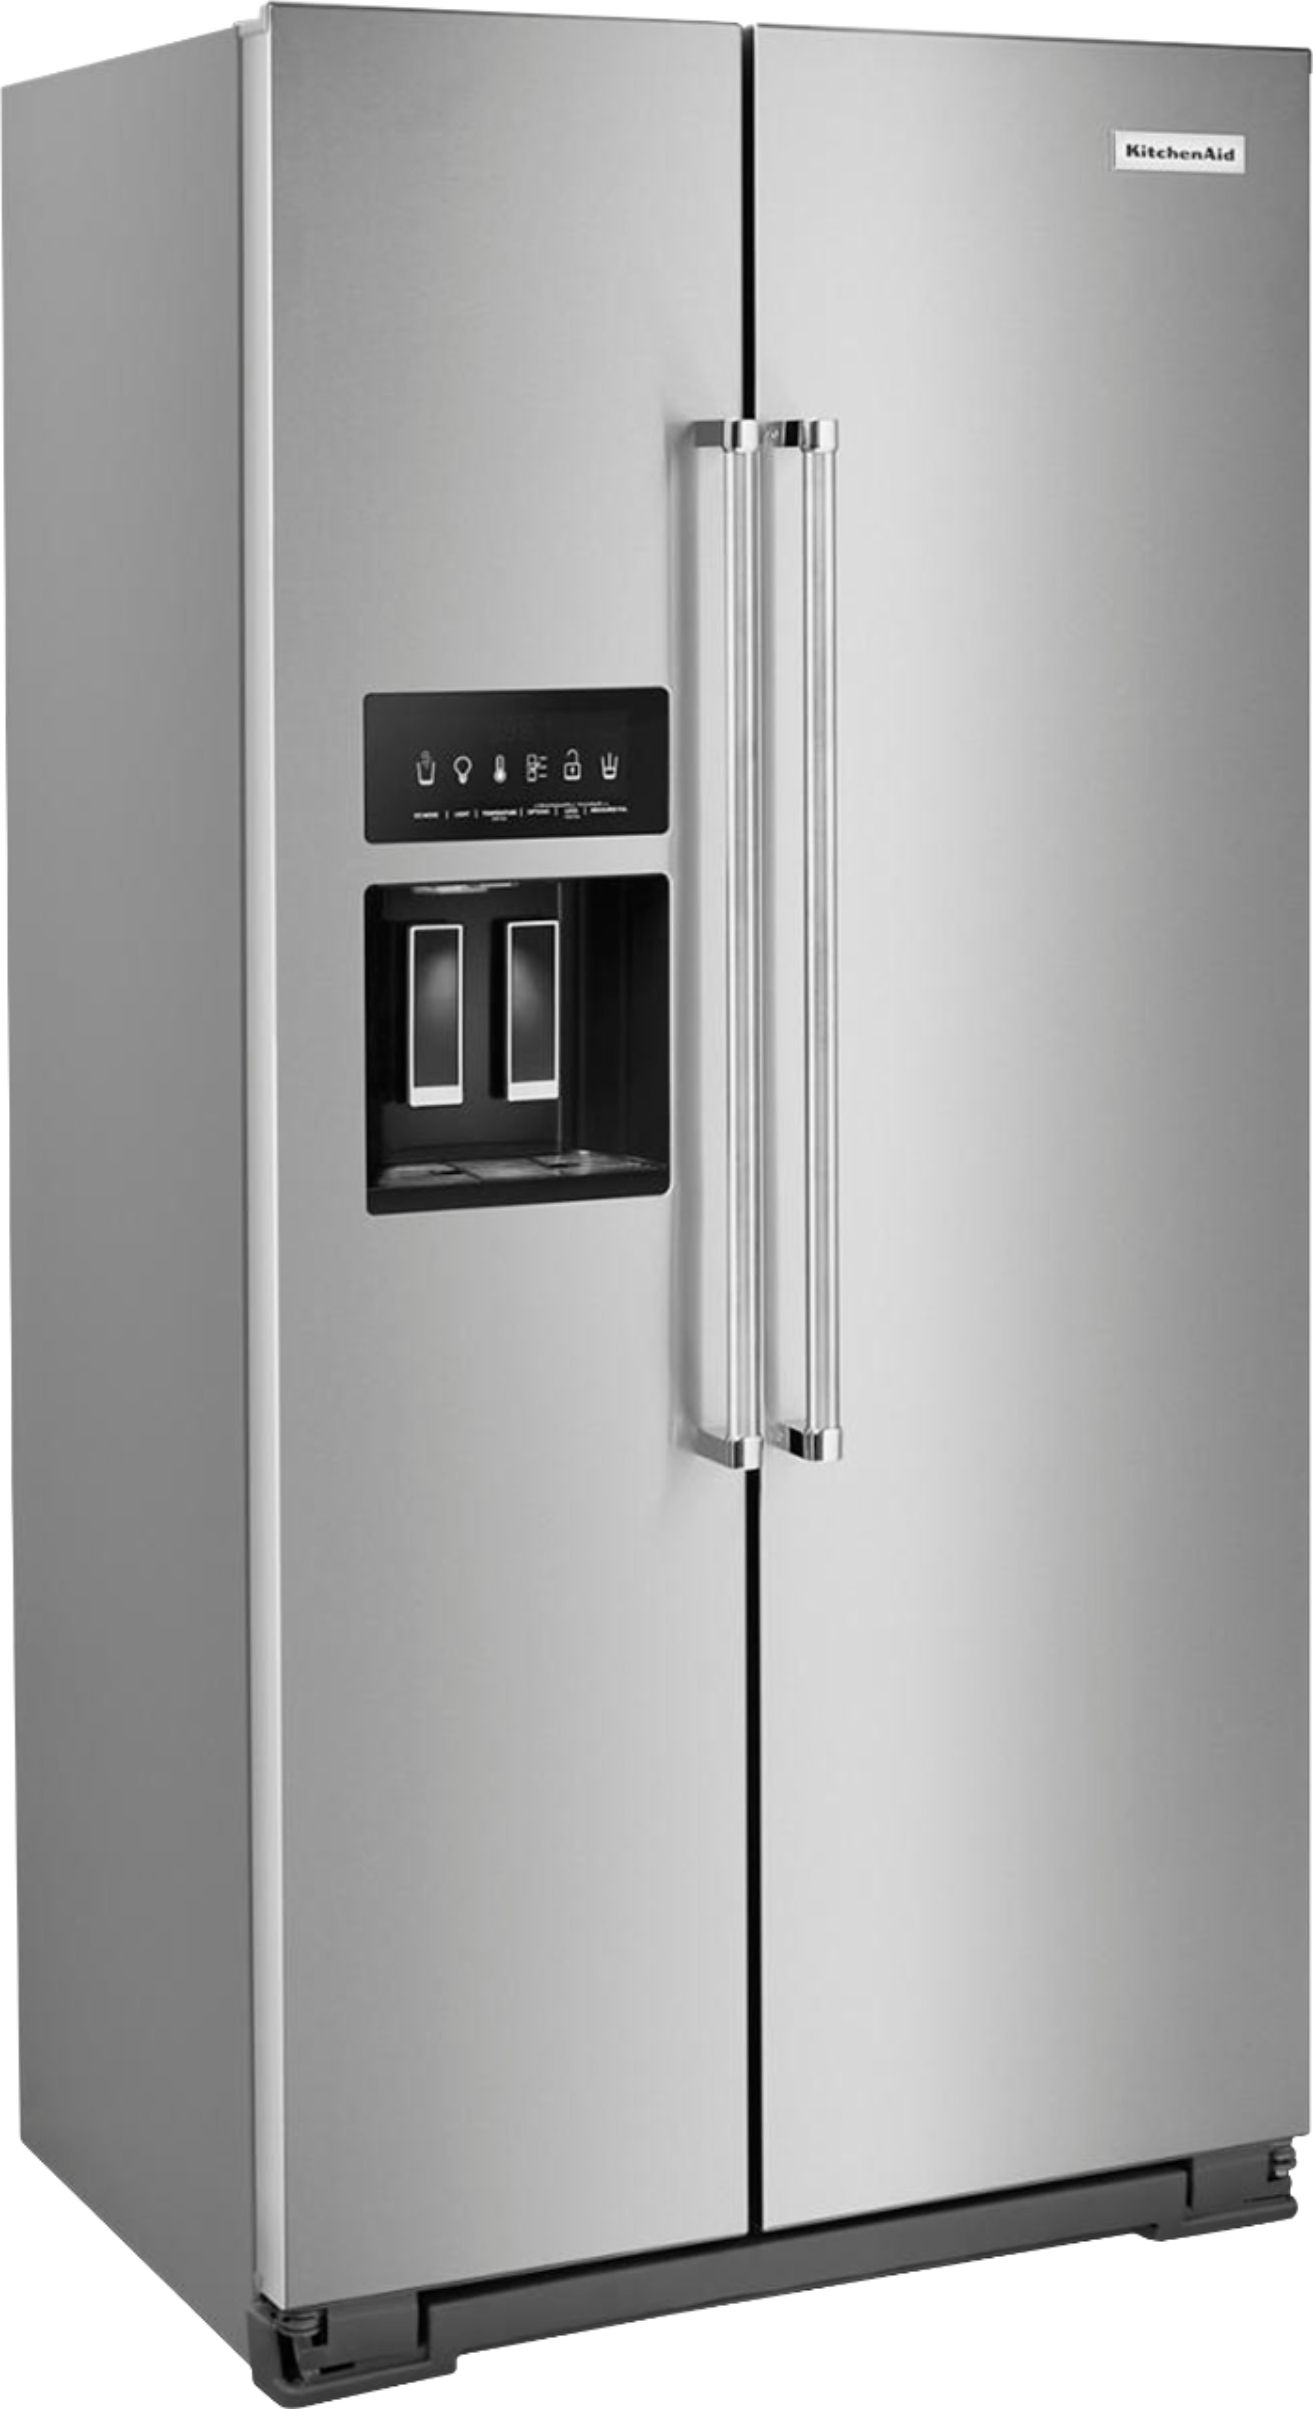 Angle View: KitchenAid - 25.5 Cu. Ft. Side-by-Side Built-In Refrigerator - Black stainless steel